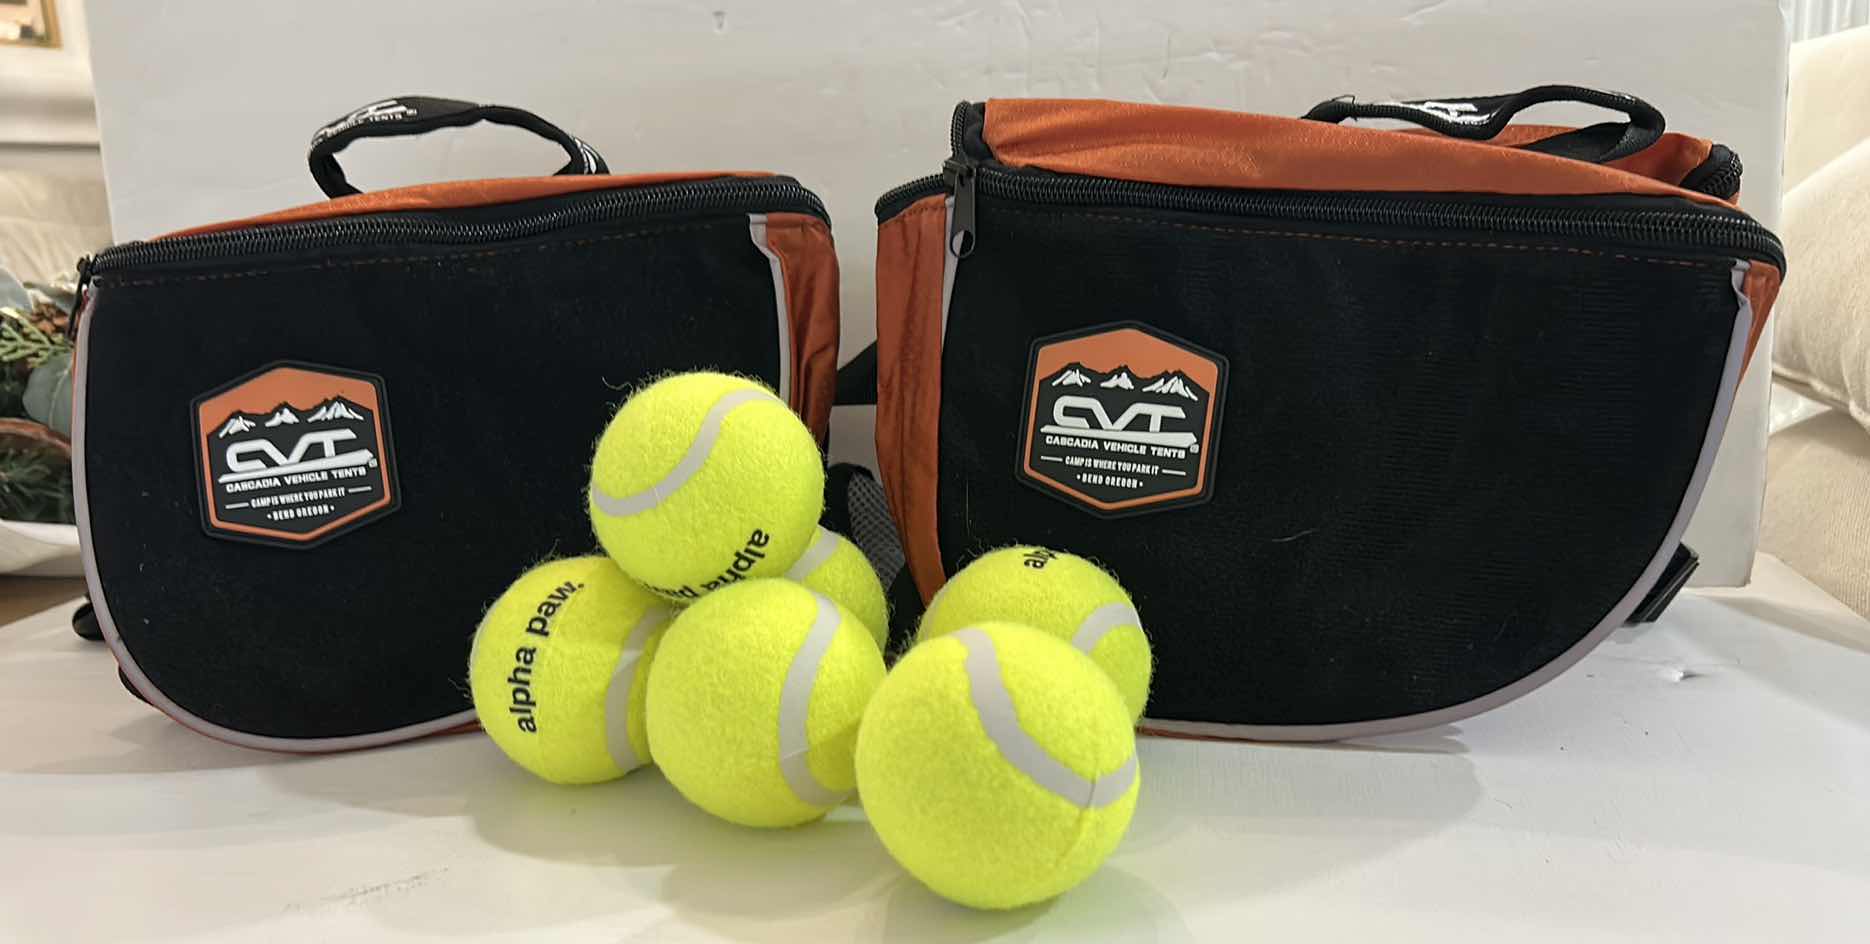 Photo 1 of NEW DOG ASSORTMENT- 2 SMALL CVT BACKPACKS/SADDLE BAGS AND 6 ALPHA PAWS TENNIS BALLS  $60